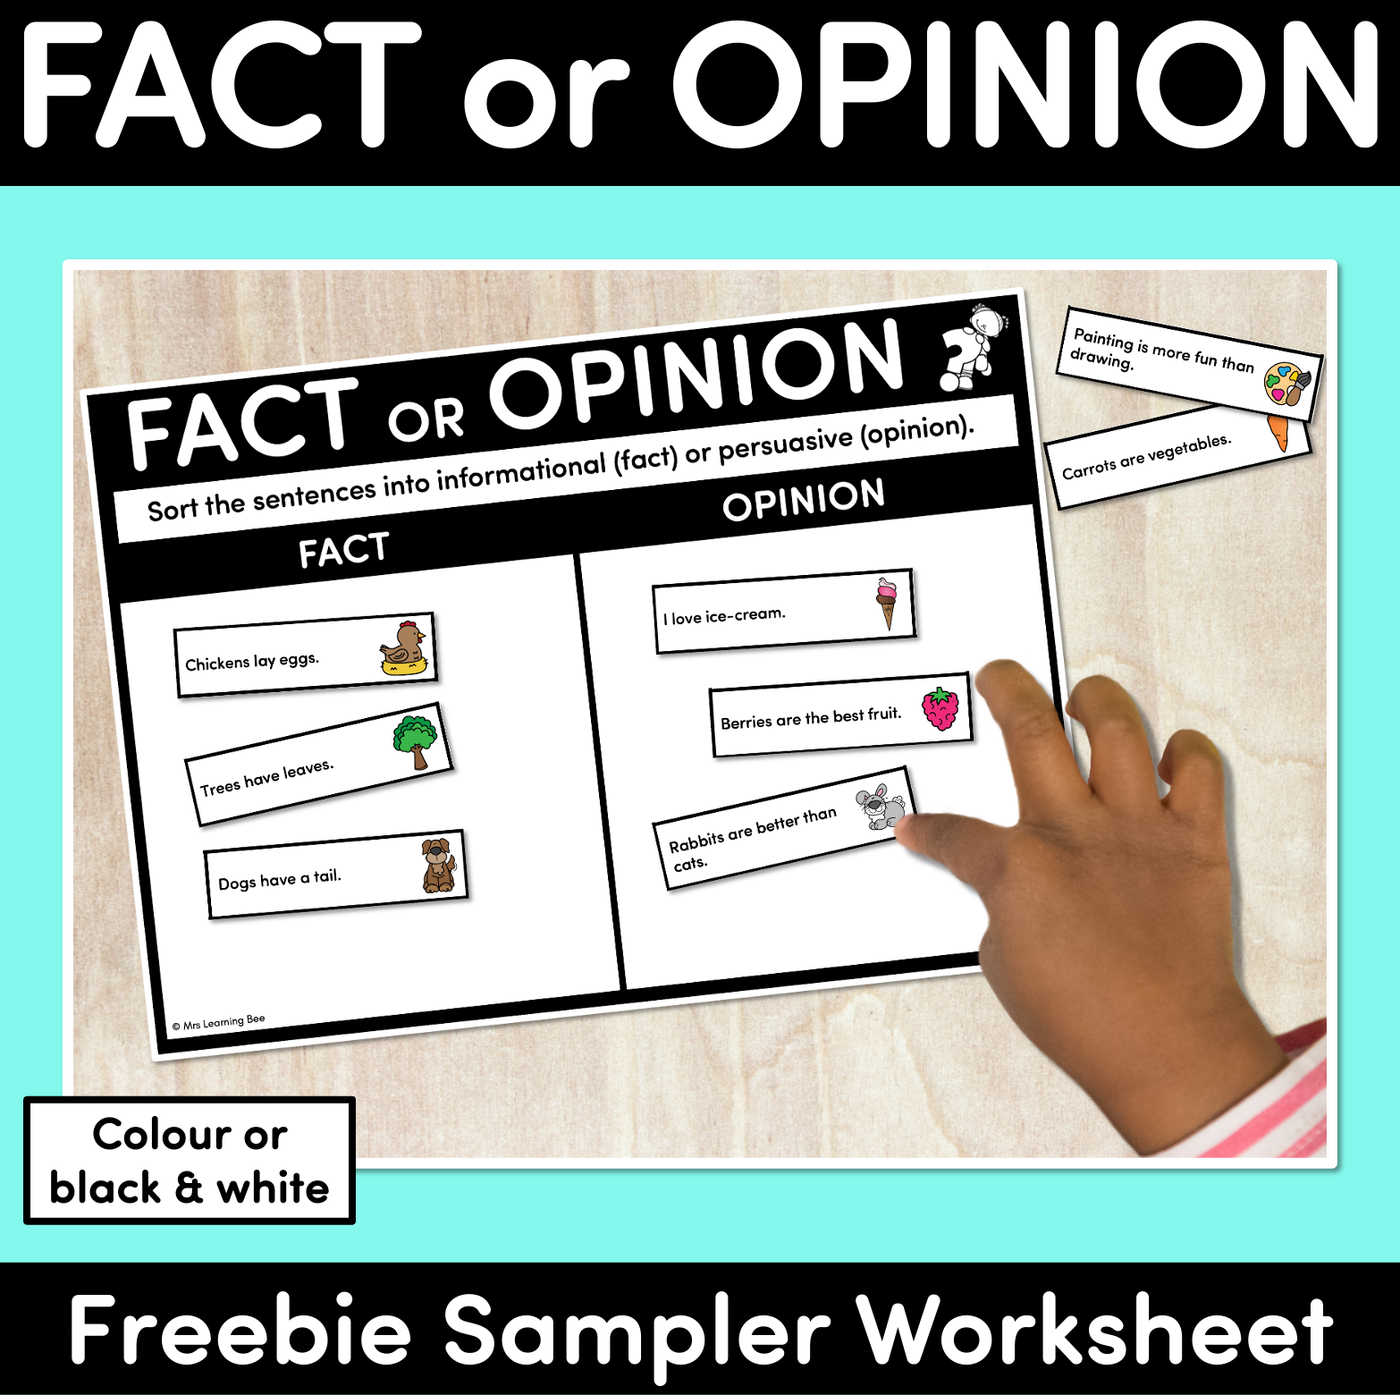 Fact or Opinion Cut & Paste Activity